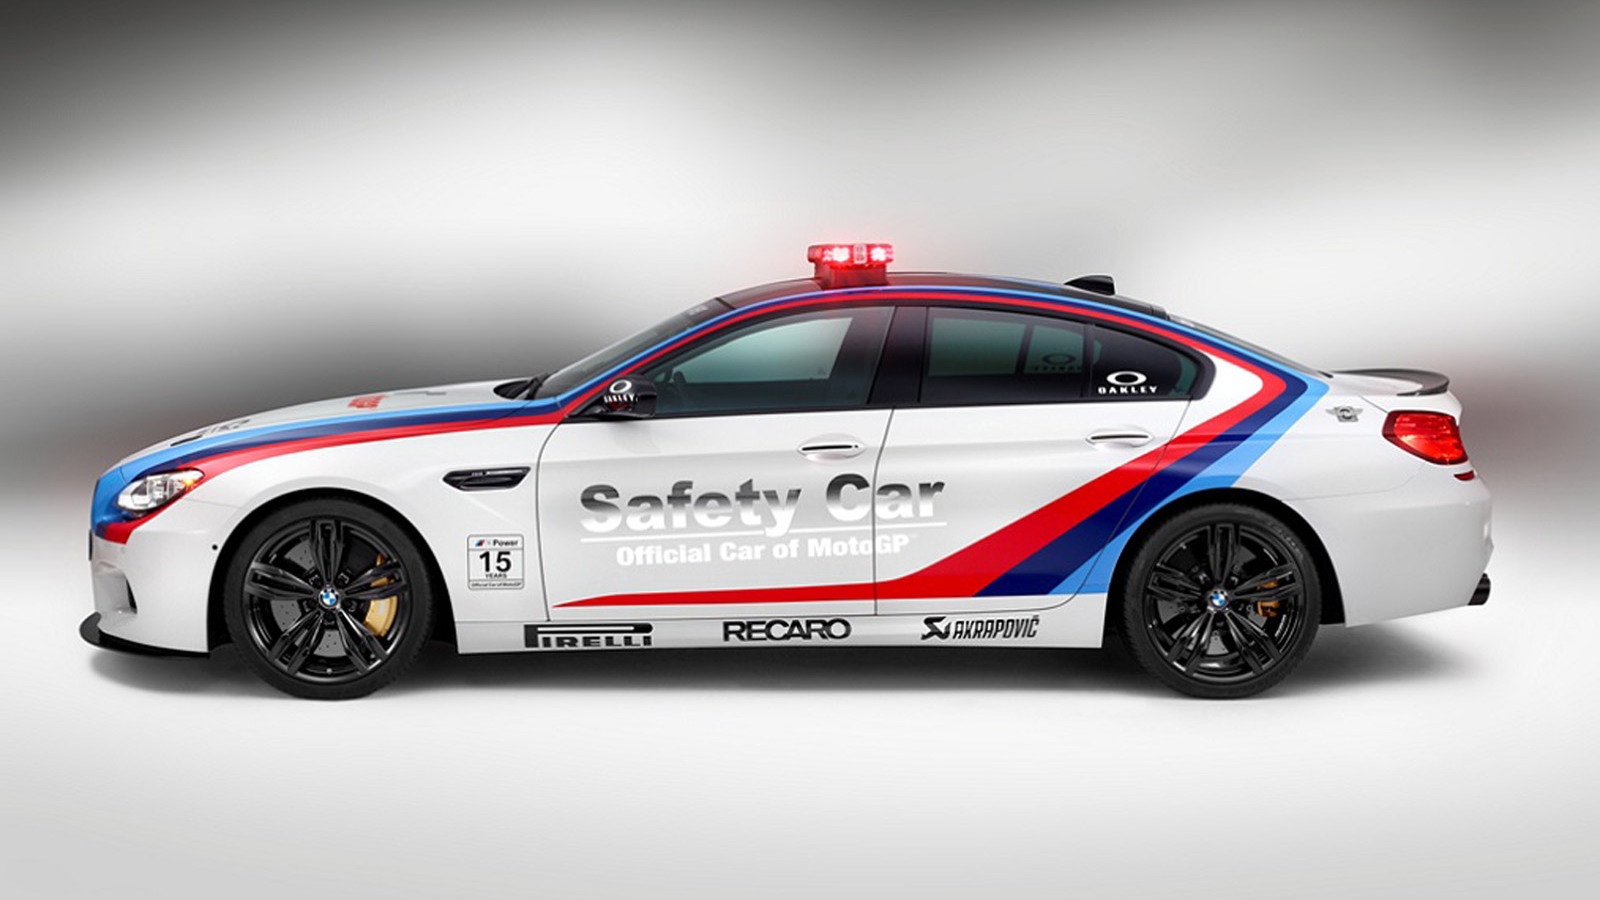 2014 BMW M6 Gran Coupe official safety car for MotoGP